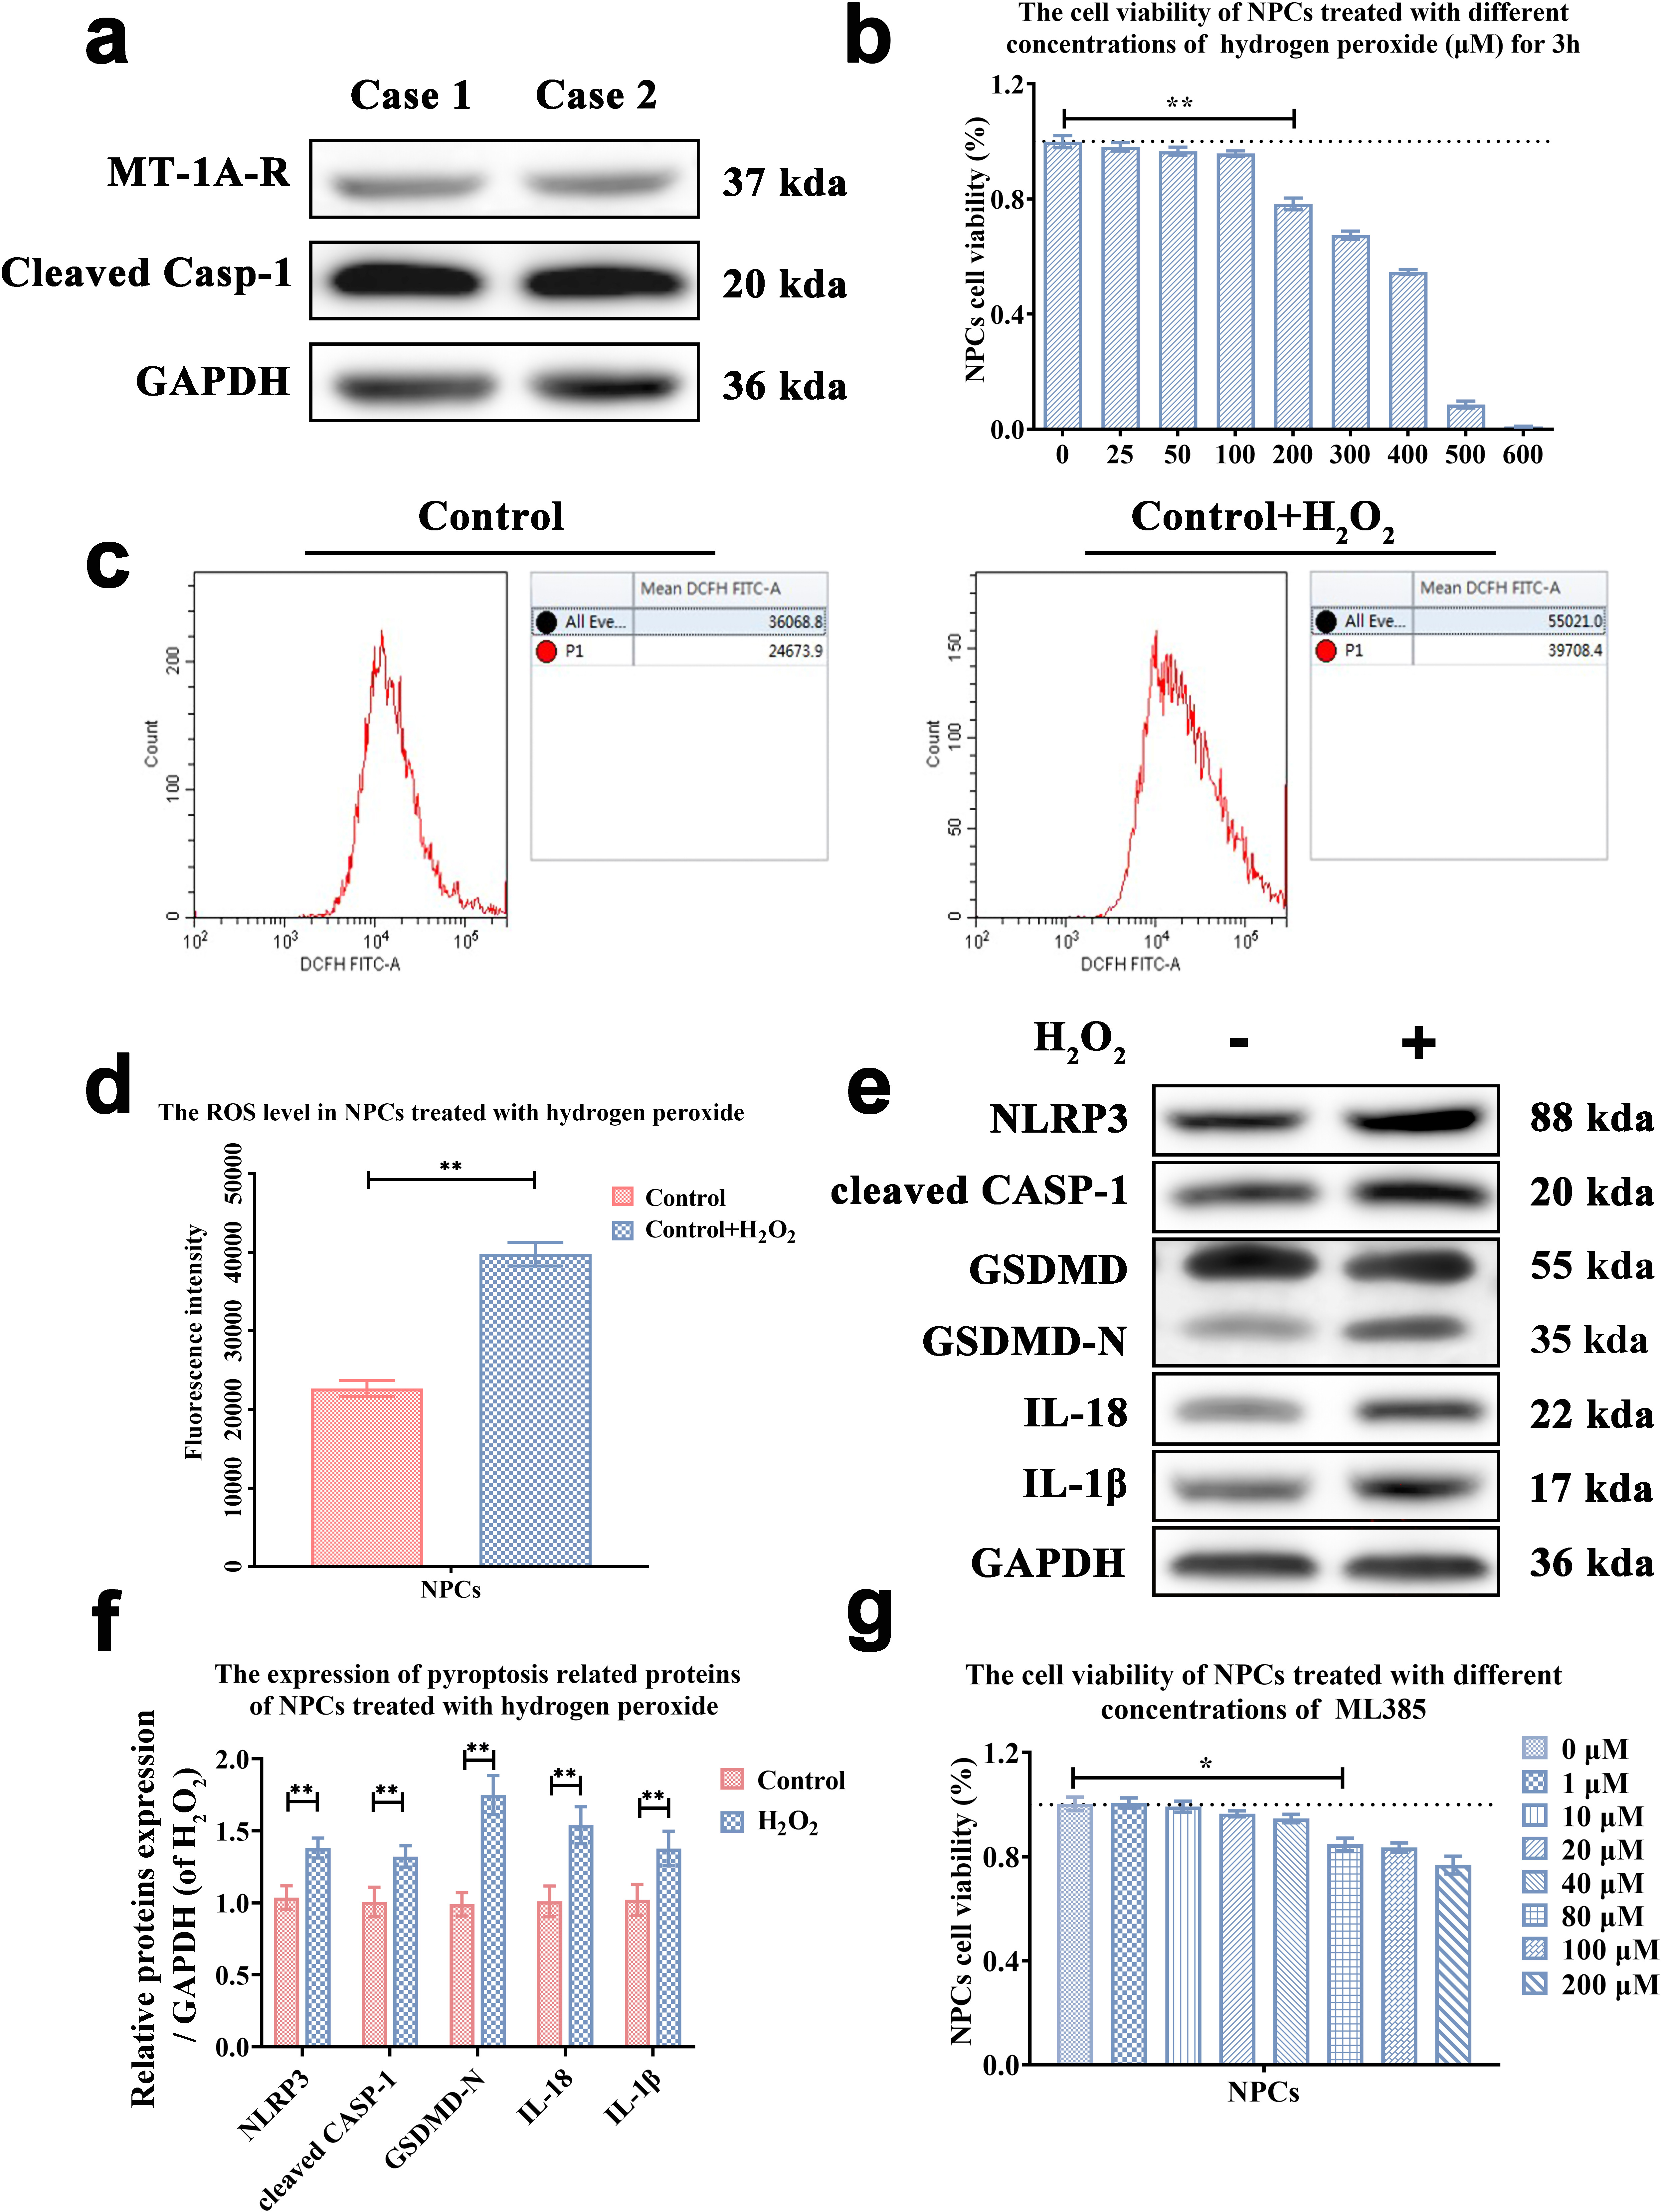 Fig. 2 
            Detection of pyroptosis-related proteins in human nucleus pulposus cells (NPCs). a) The expression of melatonin receptor type 1A (MT-1A-R) and cleaved caspase-1 (CASP-1) of NPCs was detected by Western blot. b) The influence of hydrogen peroxide with different concentrations on NPC viability was detected by the cell counting kit-8 test. c) The intracellular reactive oxygen species (ROS) levels of NPCs were detected by flow cytometry through DCFH-DA staining. The P1 value represents the fluorescence intensity of each 1×104 NPCs. d) The comparison of the fluorescence intensity of NPCs treated with and without hydrogen peroxide. e) The expression of pyroptosis-related protein NLRP3, cleaved CASP-1, N-terminal fragment of gasdermin D (GSDMD-N), interleukin (IL)-18, and IL-1β expressed in NPCs with and without treatment of hydrogen peroxide (200 μM for three hours) was detected by Western blot. f) The panel showed the gray histogram of the Western blot band in Figure 2e. g) The influence of ML385 with different concentrations on cell viability of NPCs. *p＜0.05, **p < 0.01. GAPDH, glyceraldehyde 3-phosphate dehydrogenase.
          